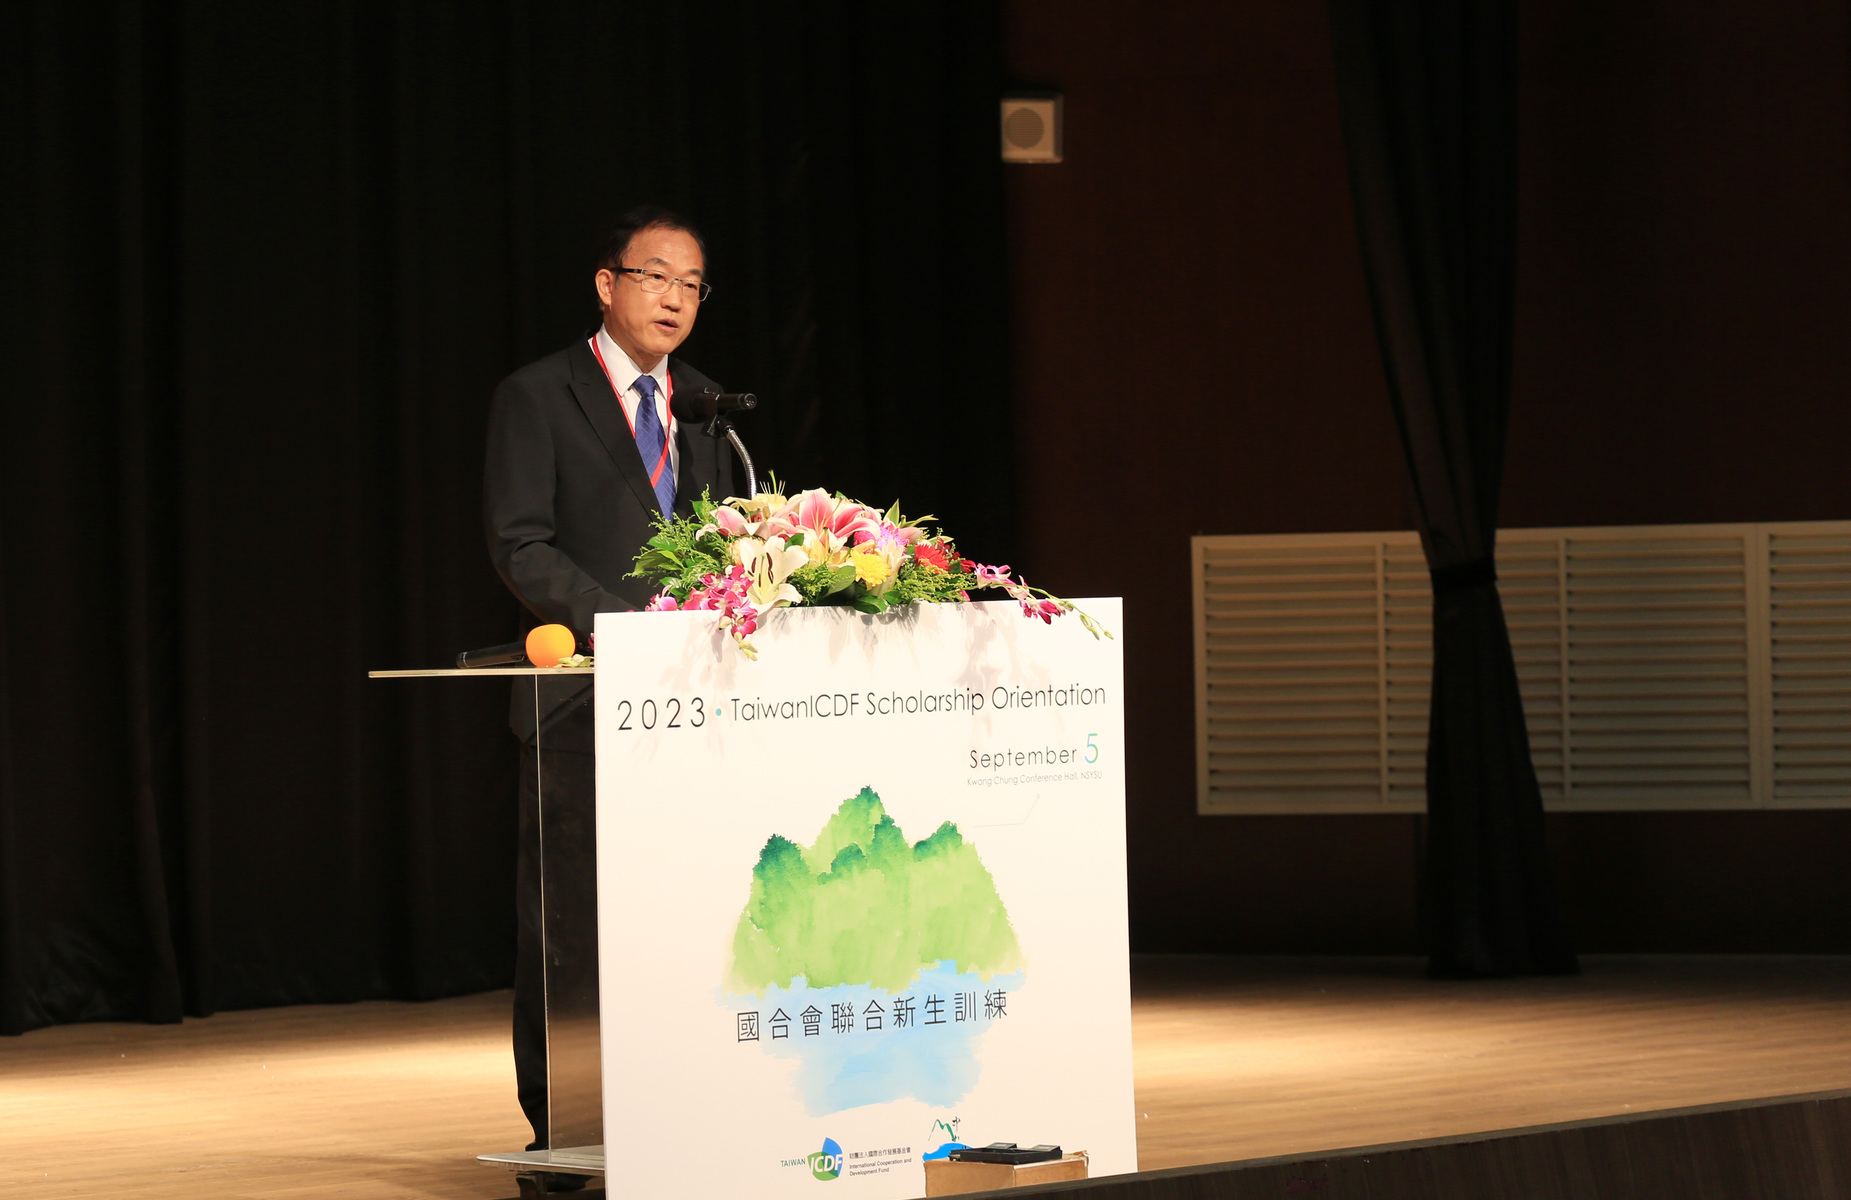 Stephen J.H. Lee, the Deputy Secretary General of TaiwanICDF, presented remarks for the orientation